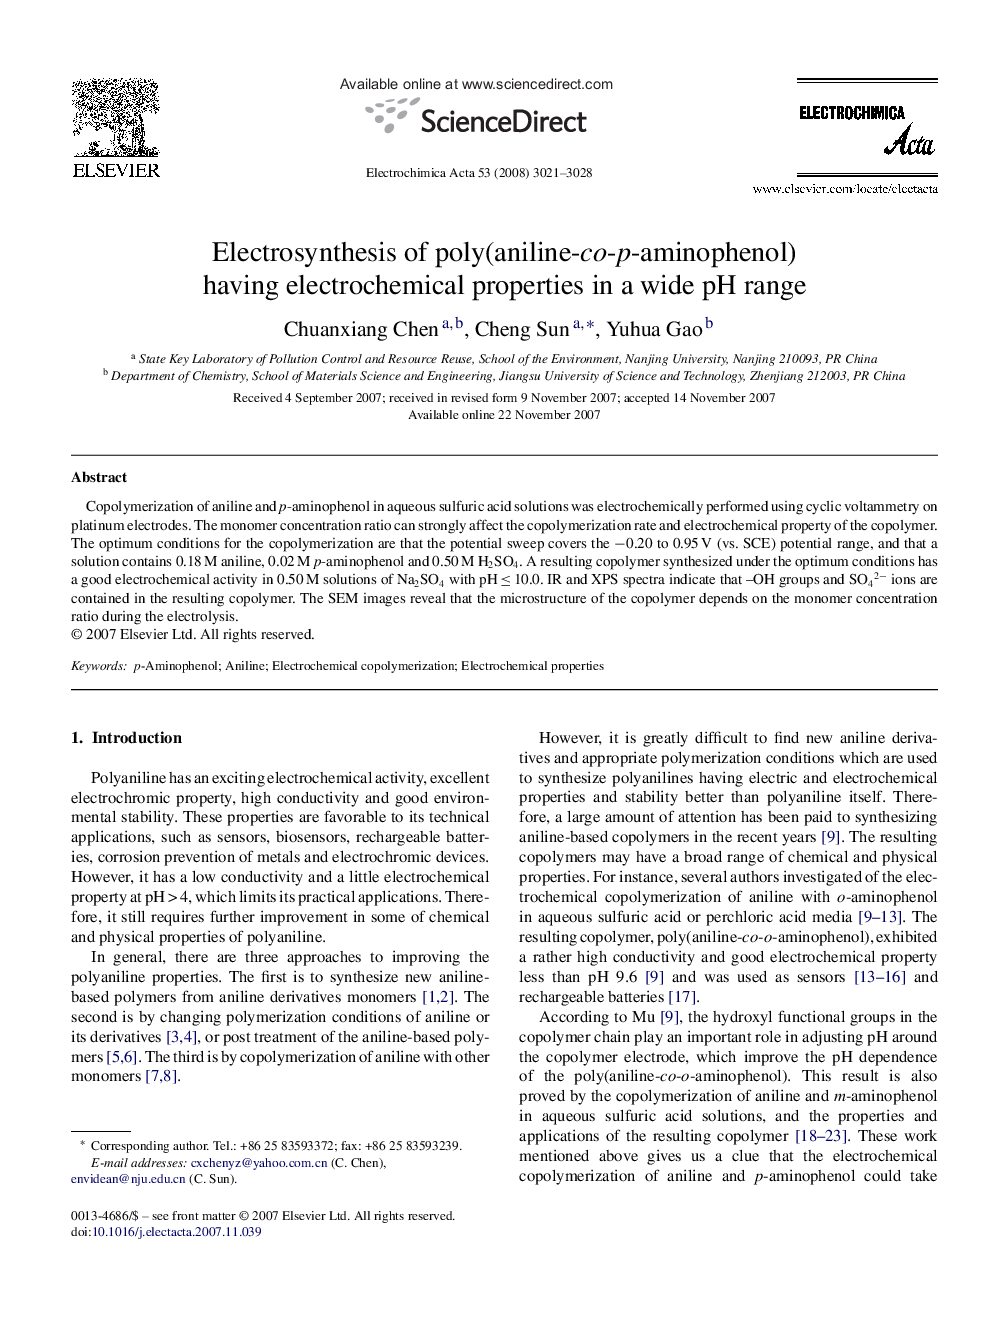 Electrosynthesis of poly(aniline-co-p-aminophenol) having electrochemical properties in a wide pH range